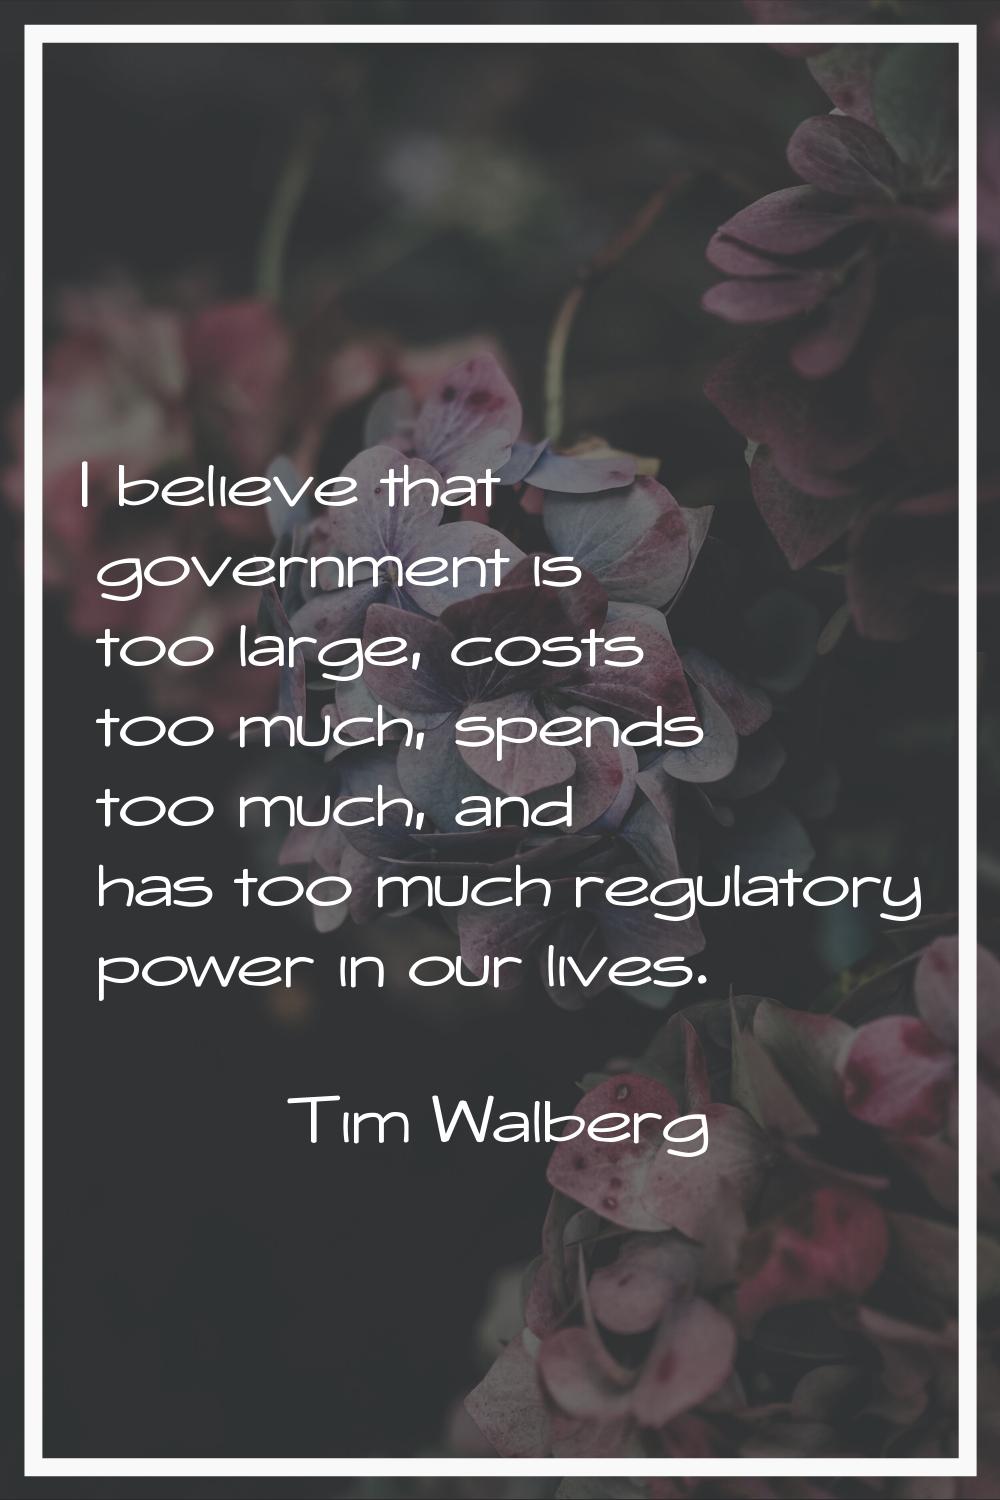 I believe that government is too large, costs too much, spends too much, and has too much regulator